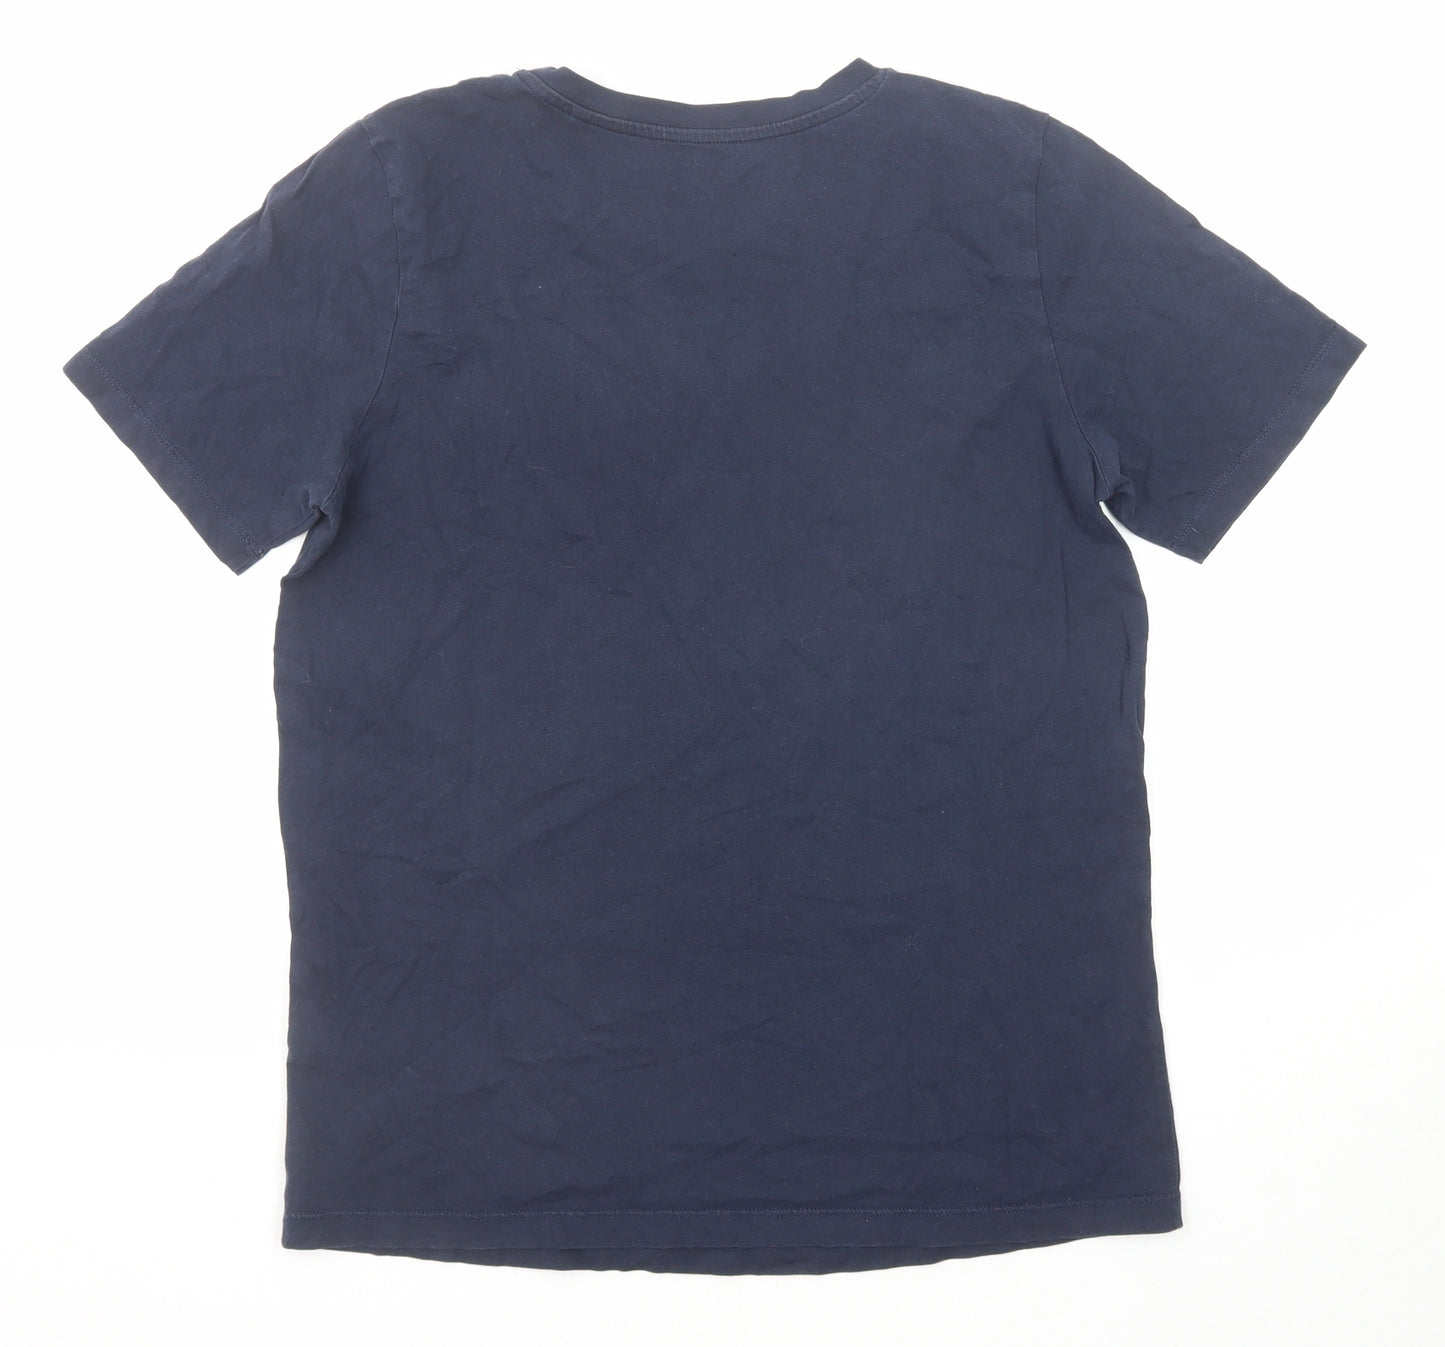 Marks and Spencer Womens Blue Cotton Basic T-Shirt Size 10 Round Neck - All In This Together